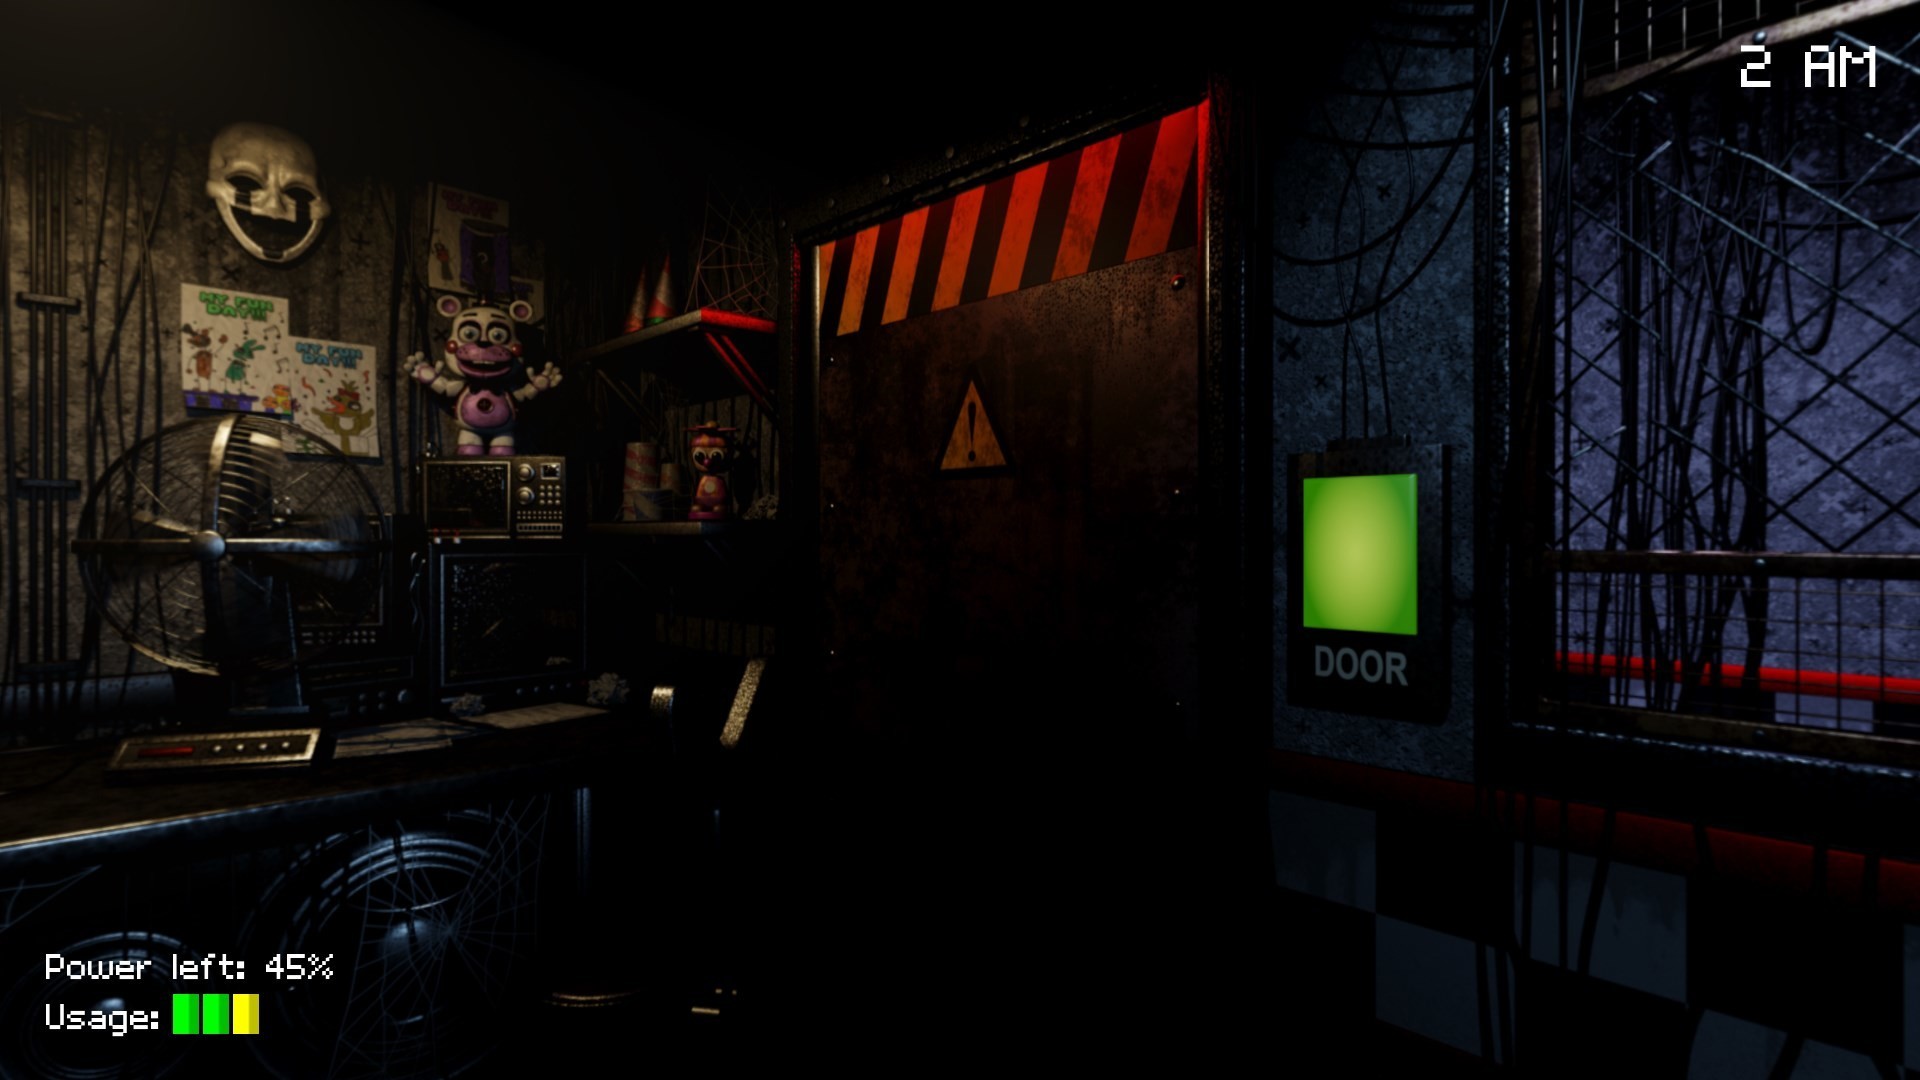 Five Nights at Freddy's Plus is no longer available on Steam. : r